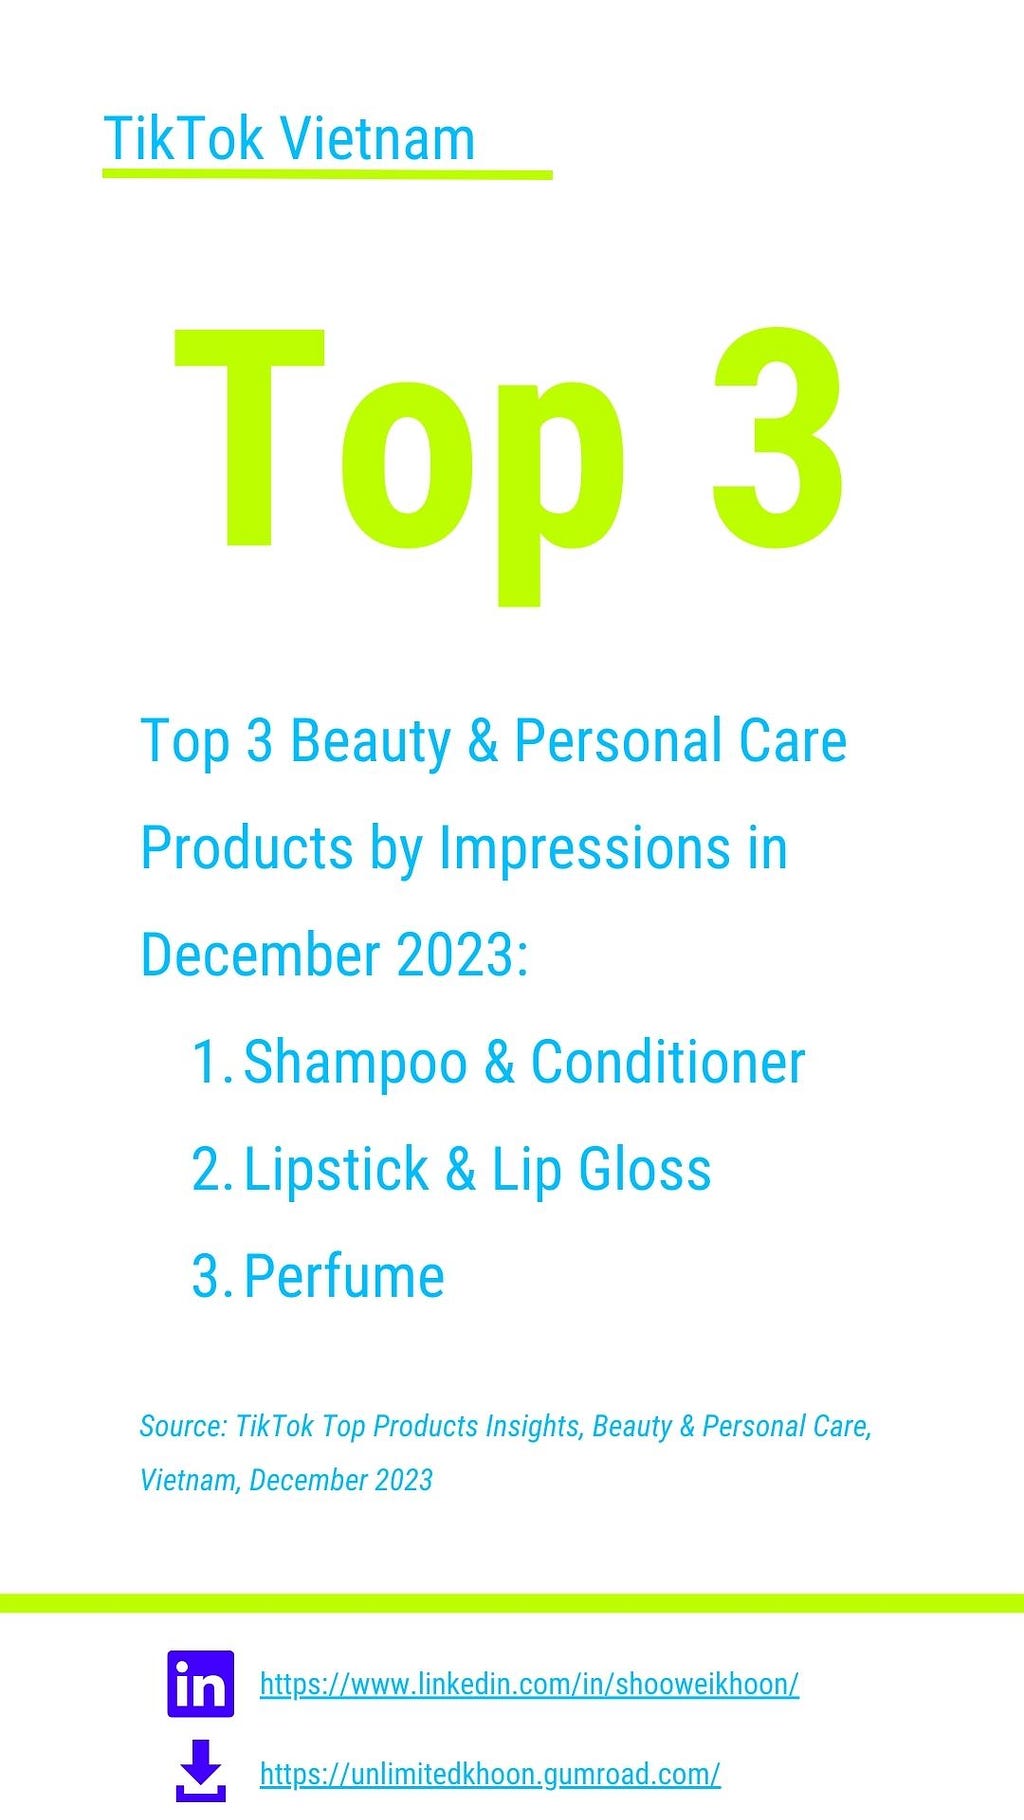 Top 3 Beauty & Personal Care Products by Impressions in VN December 2023